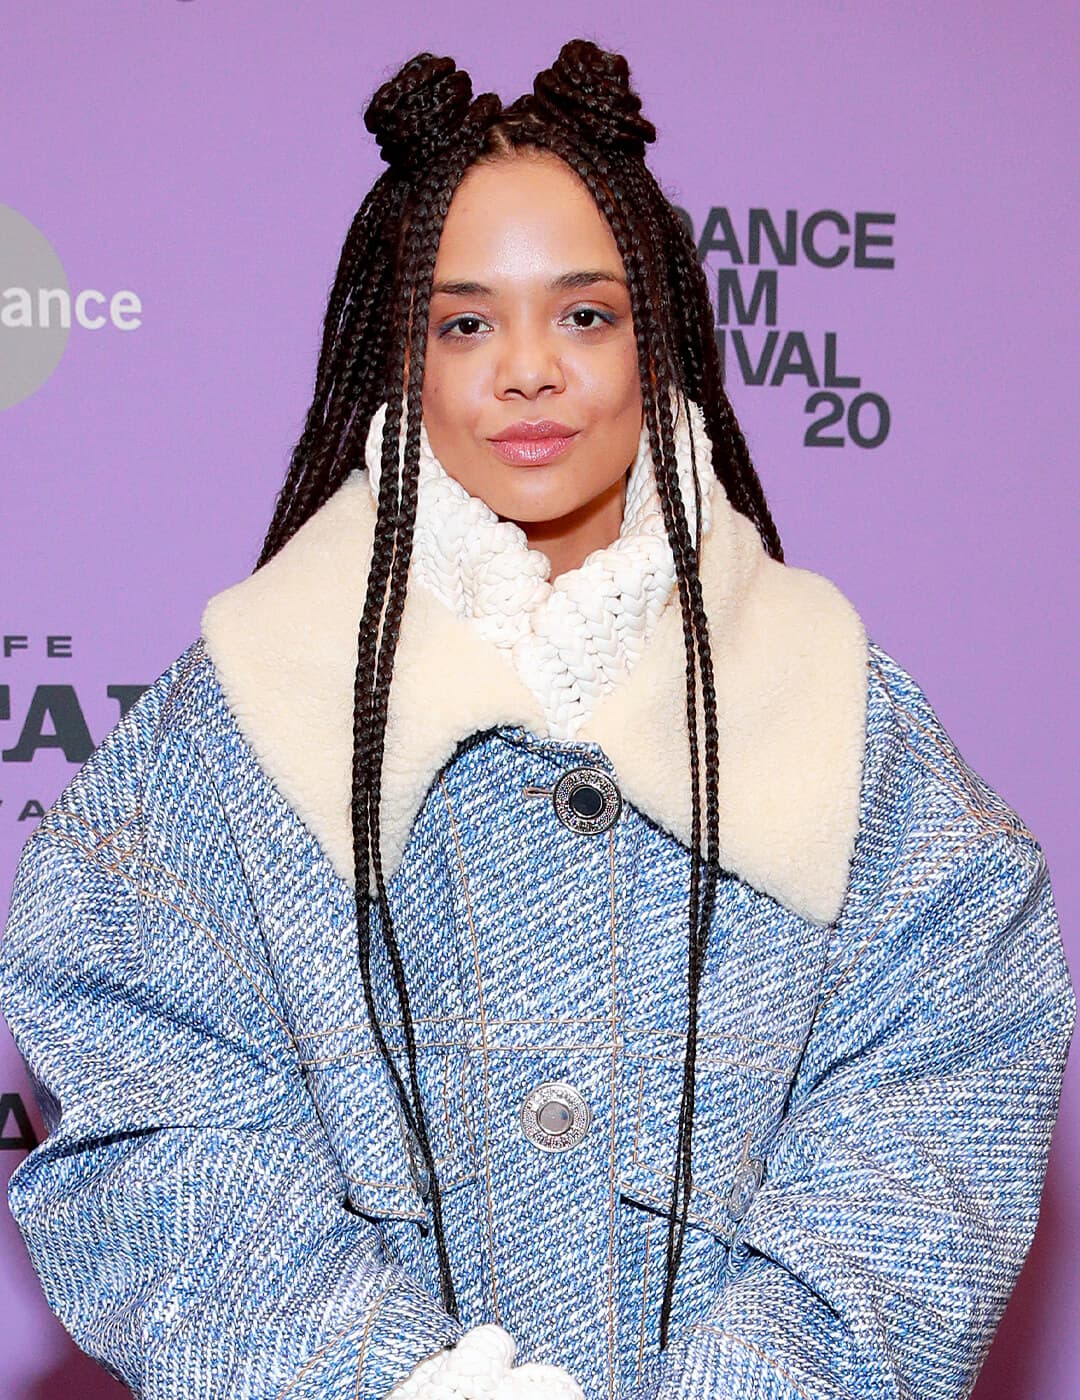 Tessa Thompson looking cool in a big, denim winter jacket and braided hairstyle with space buns